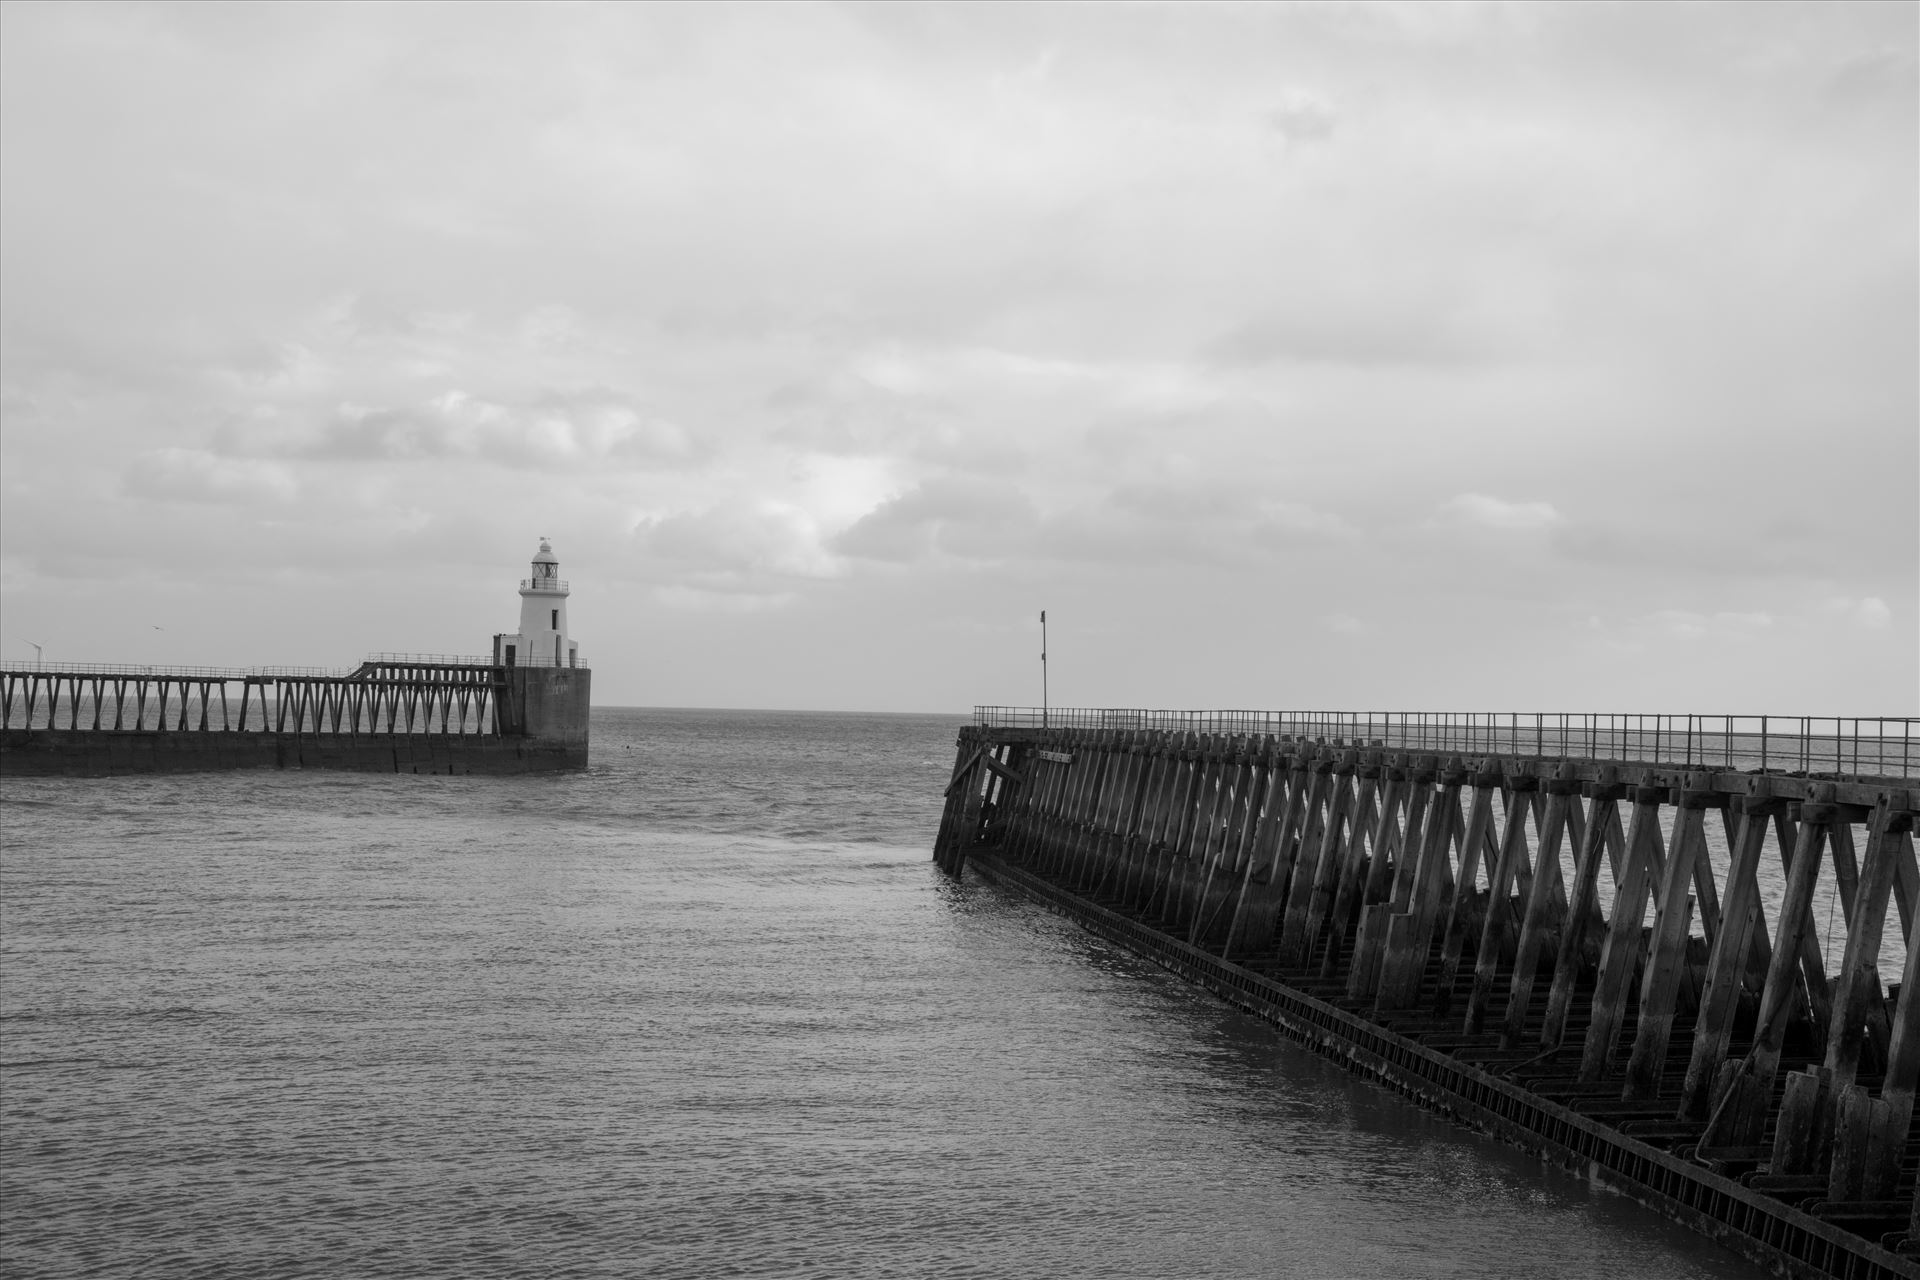 Blyth Pier and lighthouse, Northumberland, in B/W